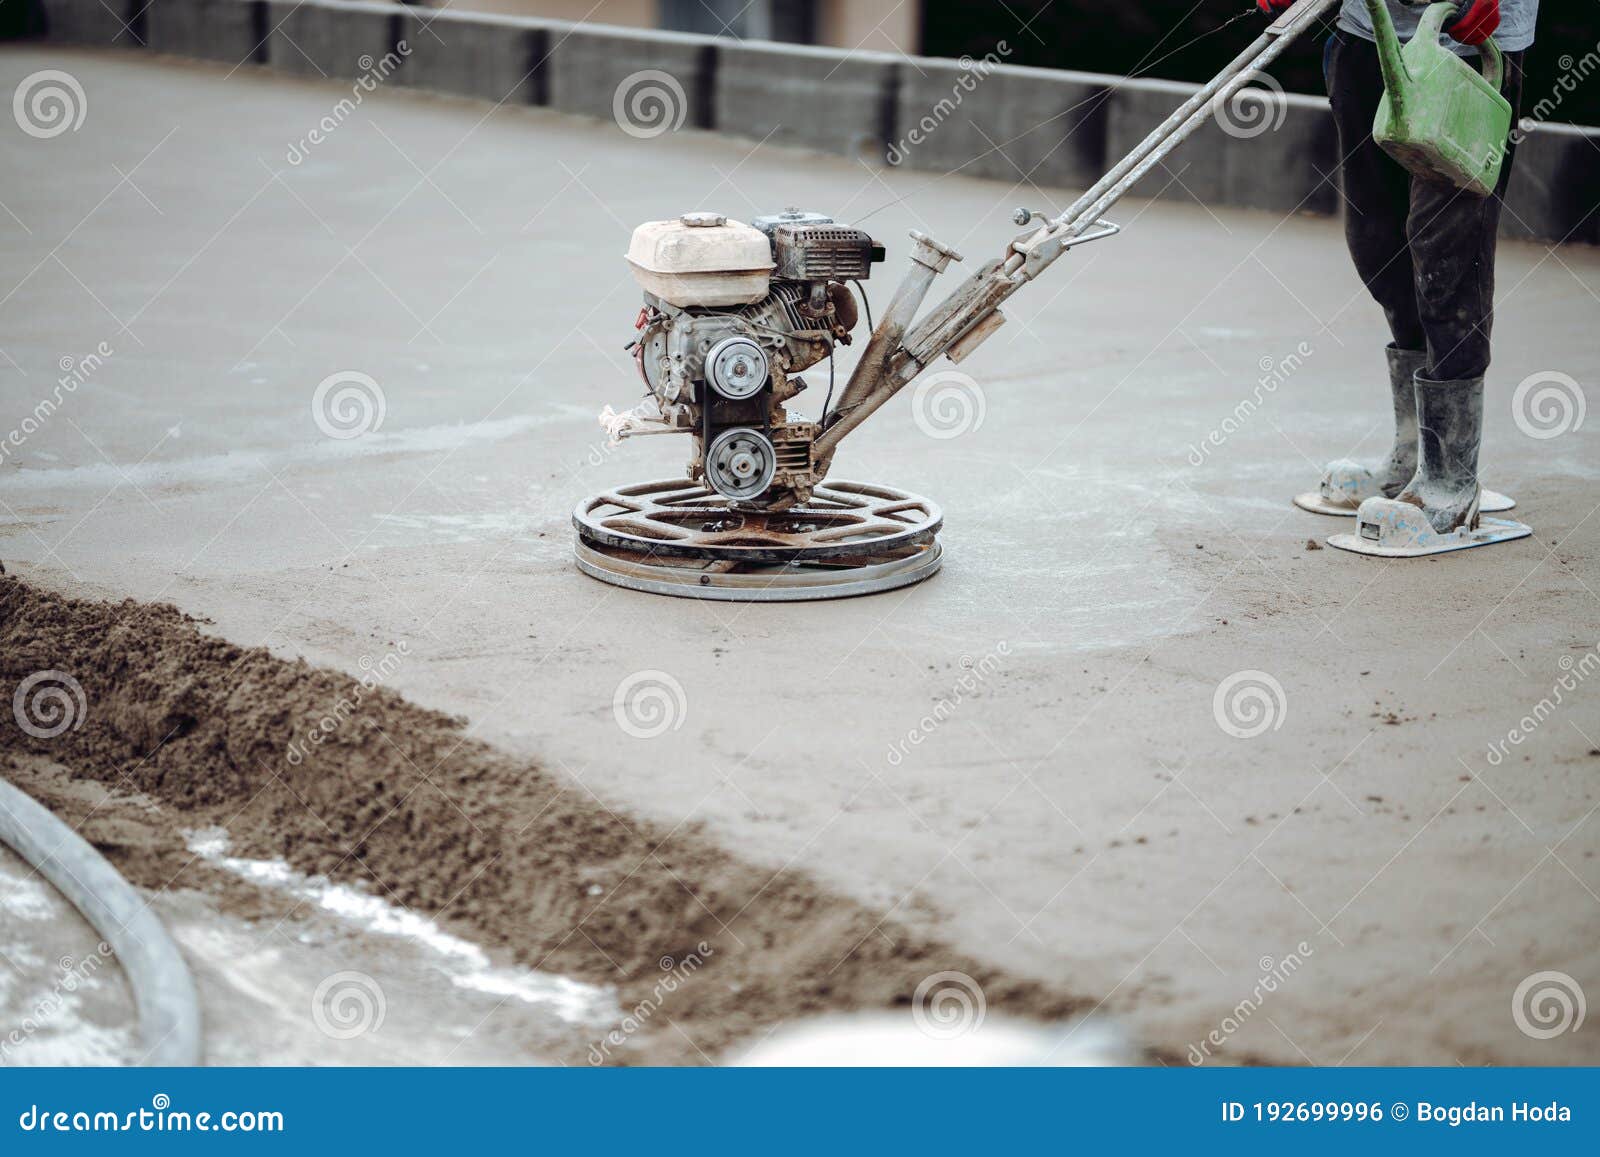 construction worker finishing concrete screed with power trowel machine, helicopter concrete screed  finishing and smoothing